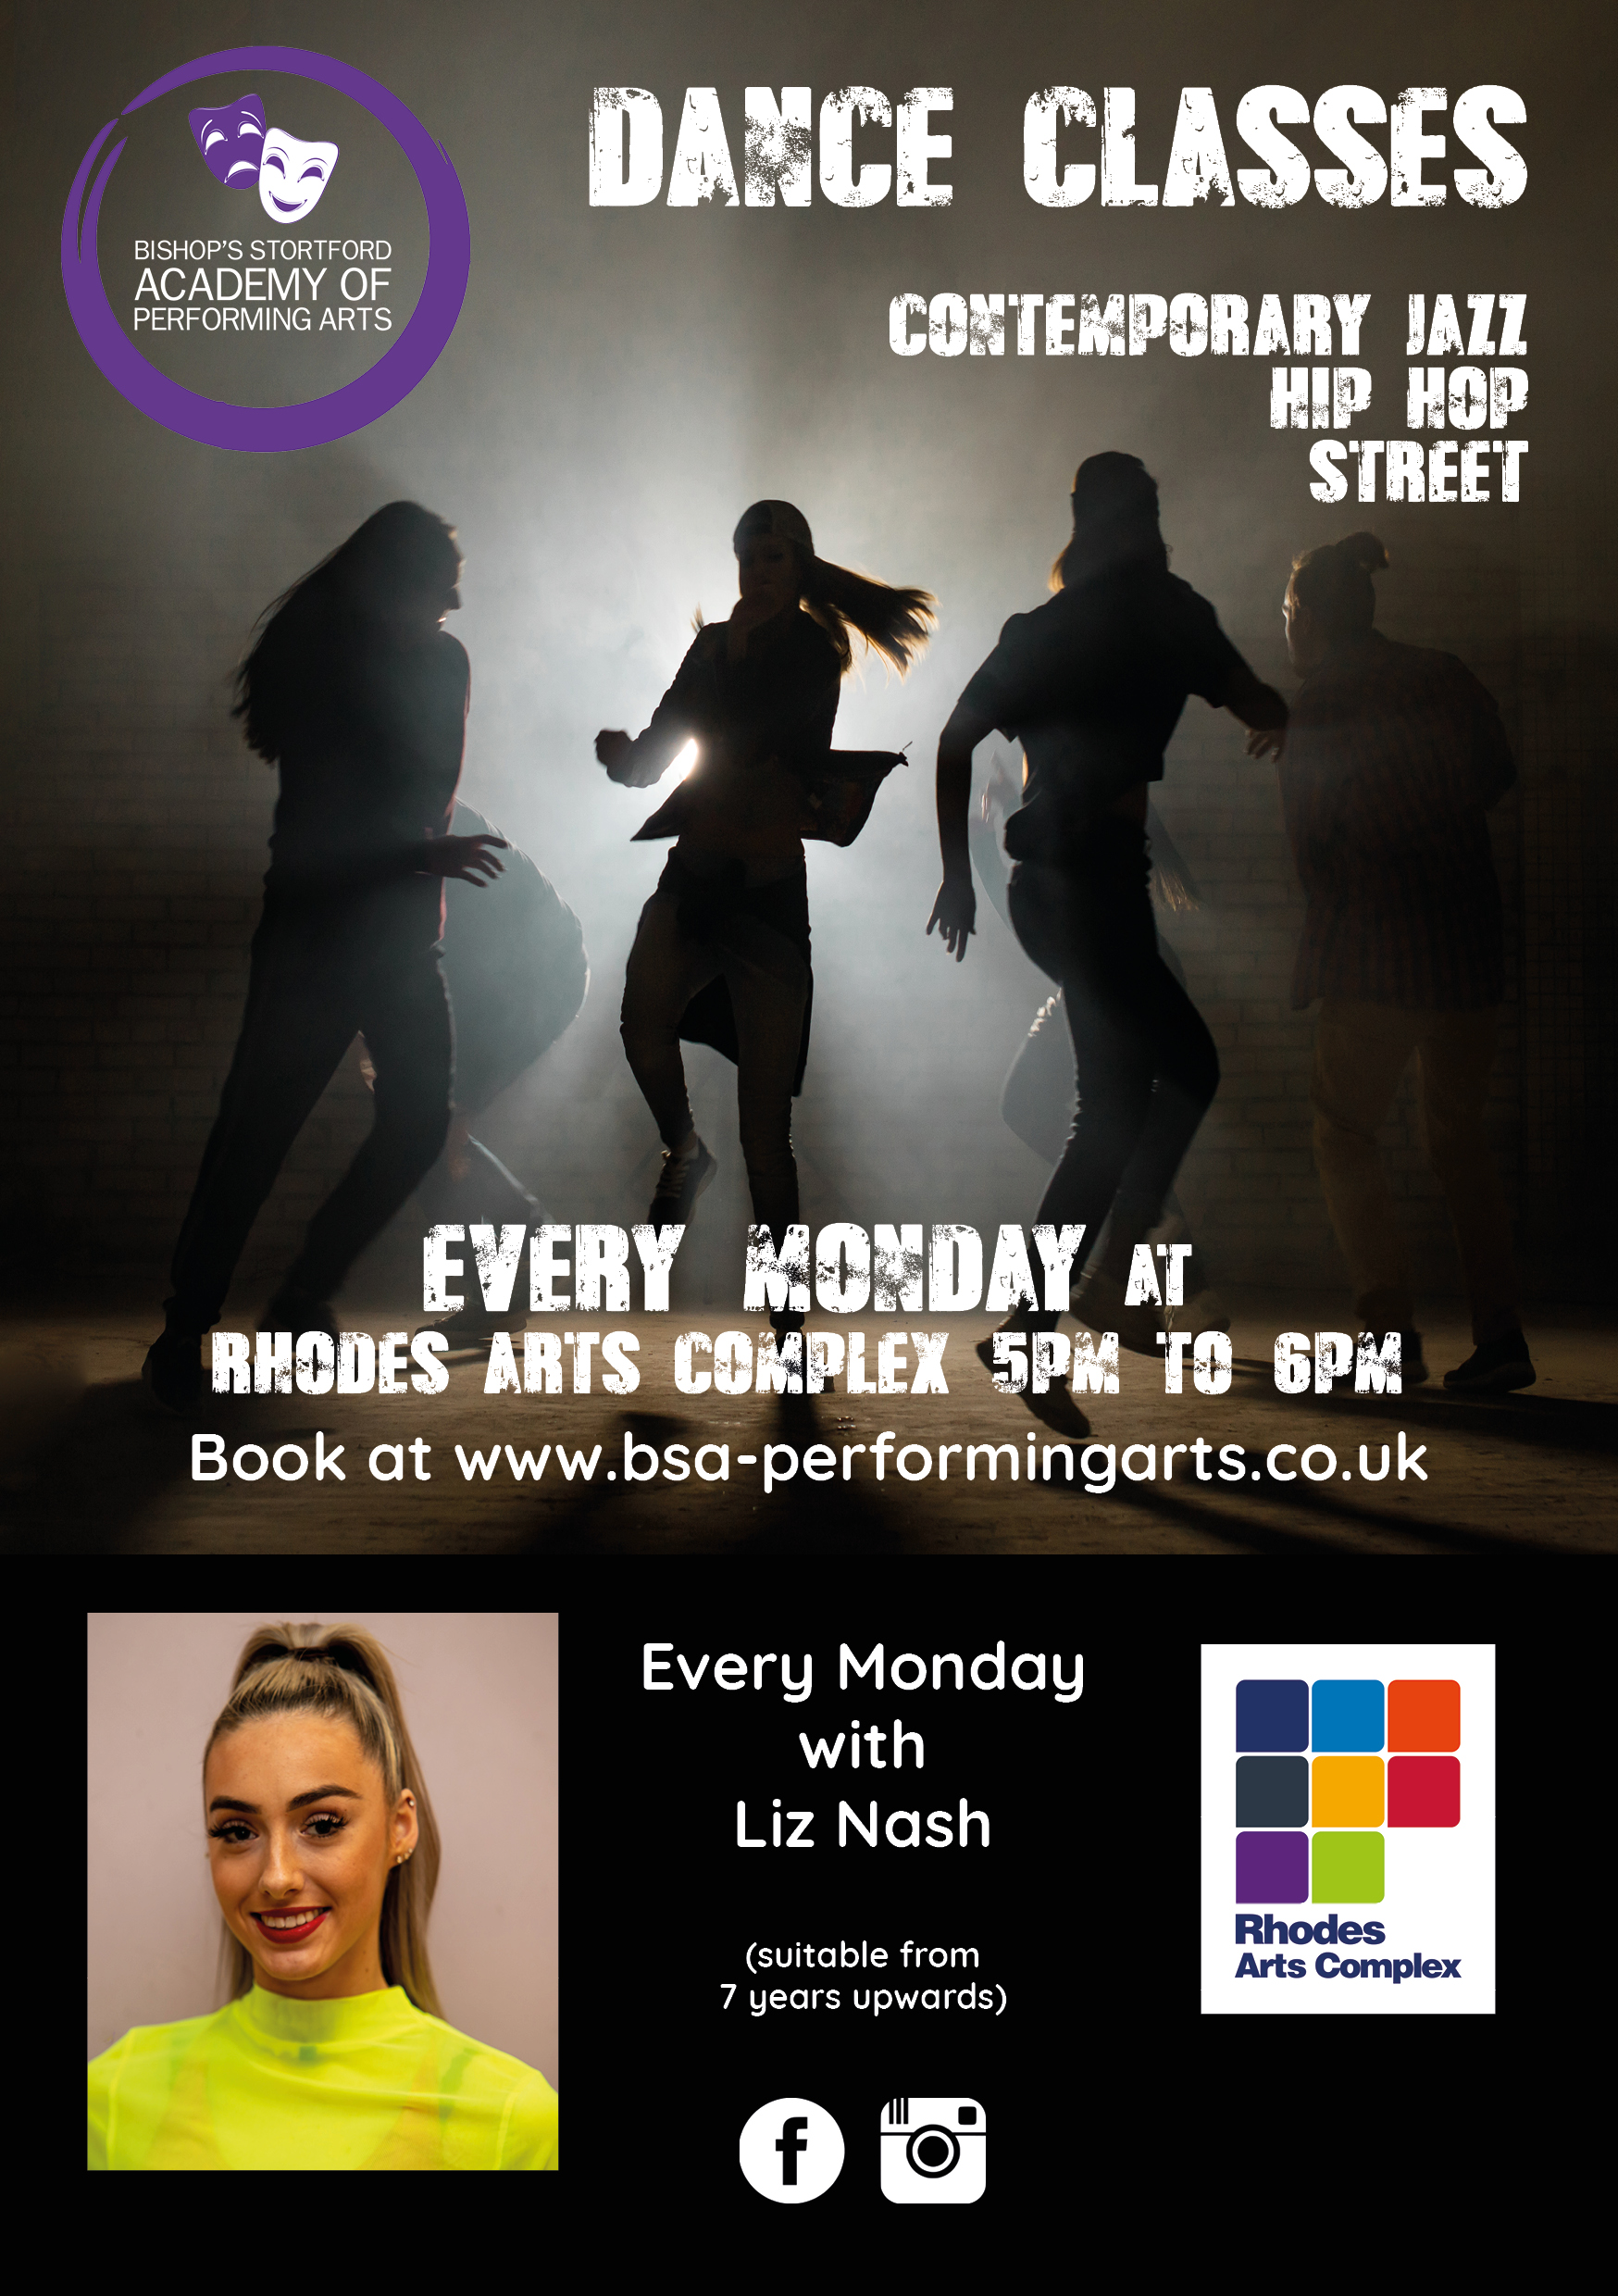 Dance Classes with Liz Nash at Rhodes Arts Complex. The best Contemporary Jazz, Hip Hop & Street dancing in Bishops Stortford. Monday 5-6pm. From age 7.